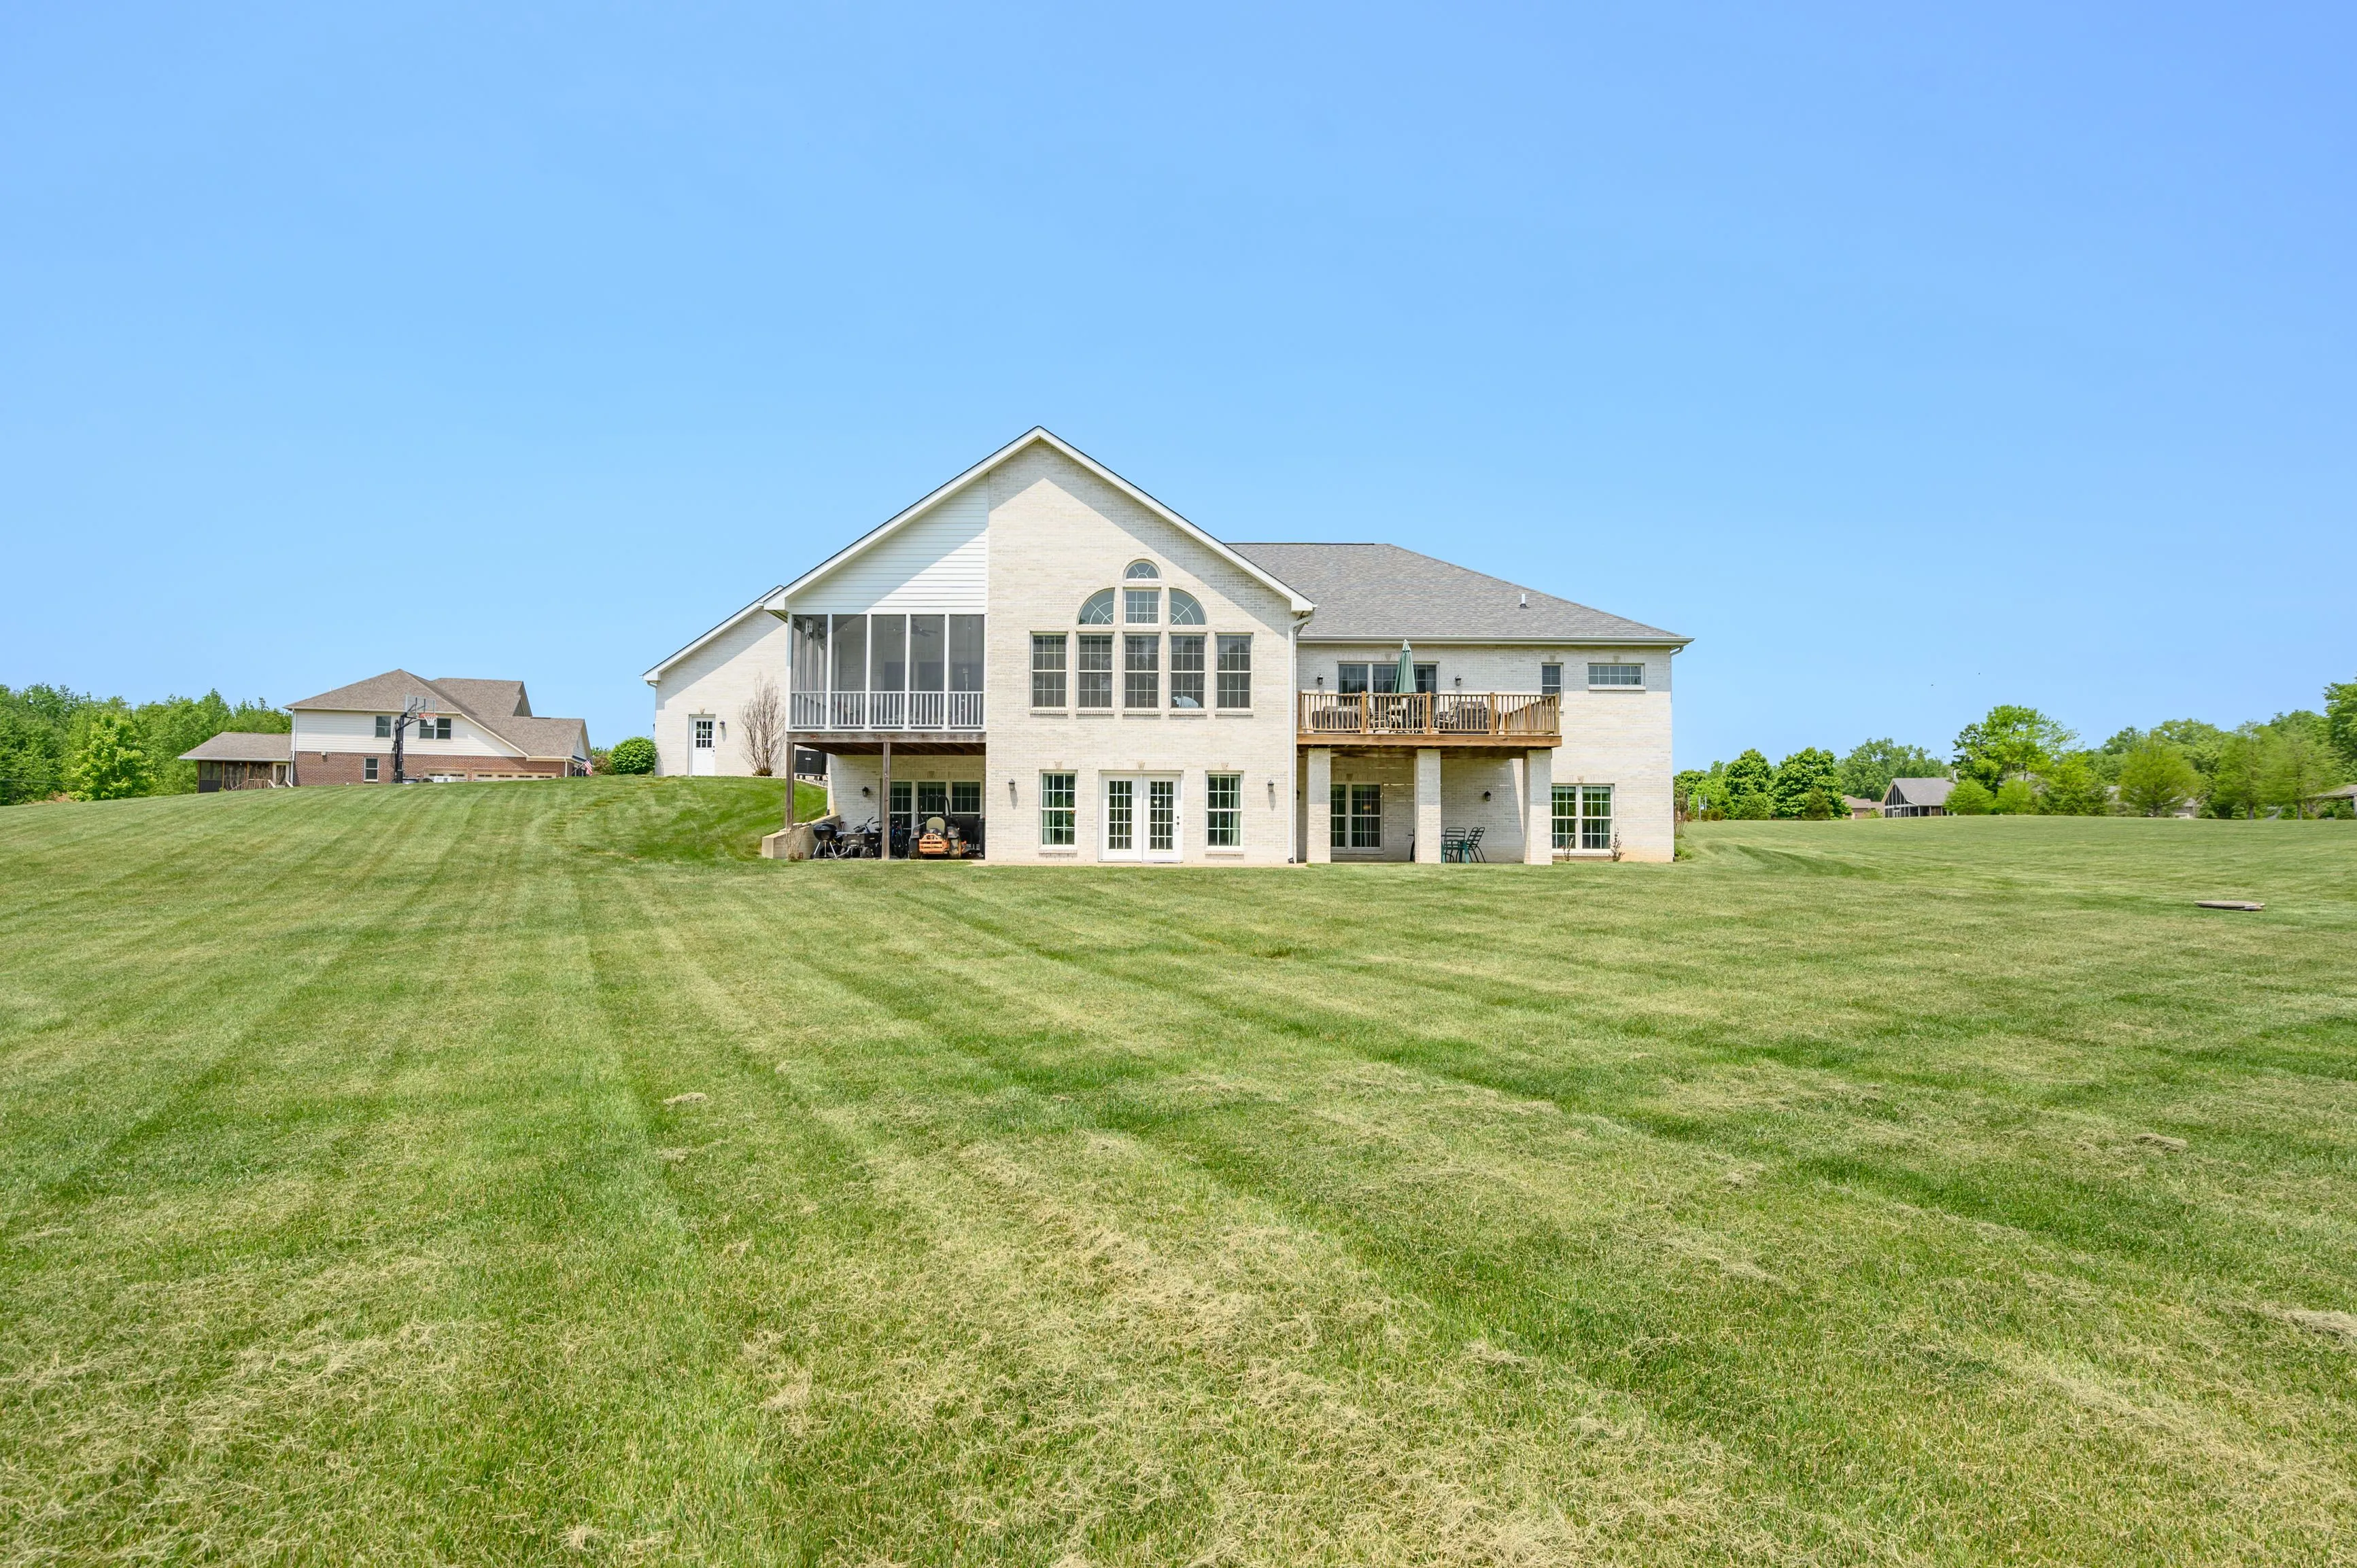 Spacious two-story house with large windows and a wooden deck overlooking an expansive lawn under a clear blue sky.